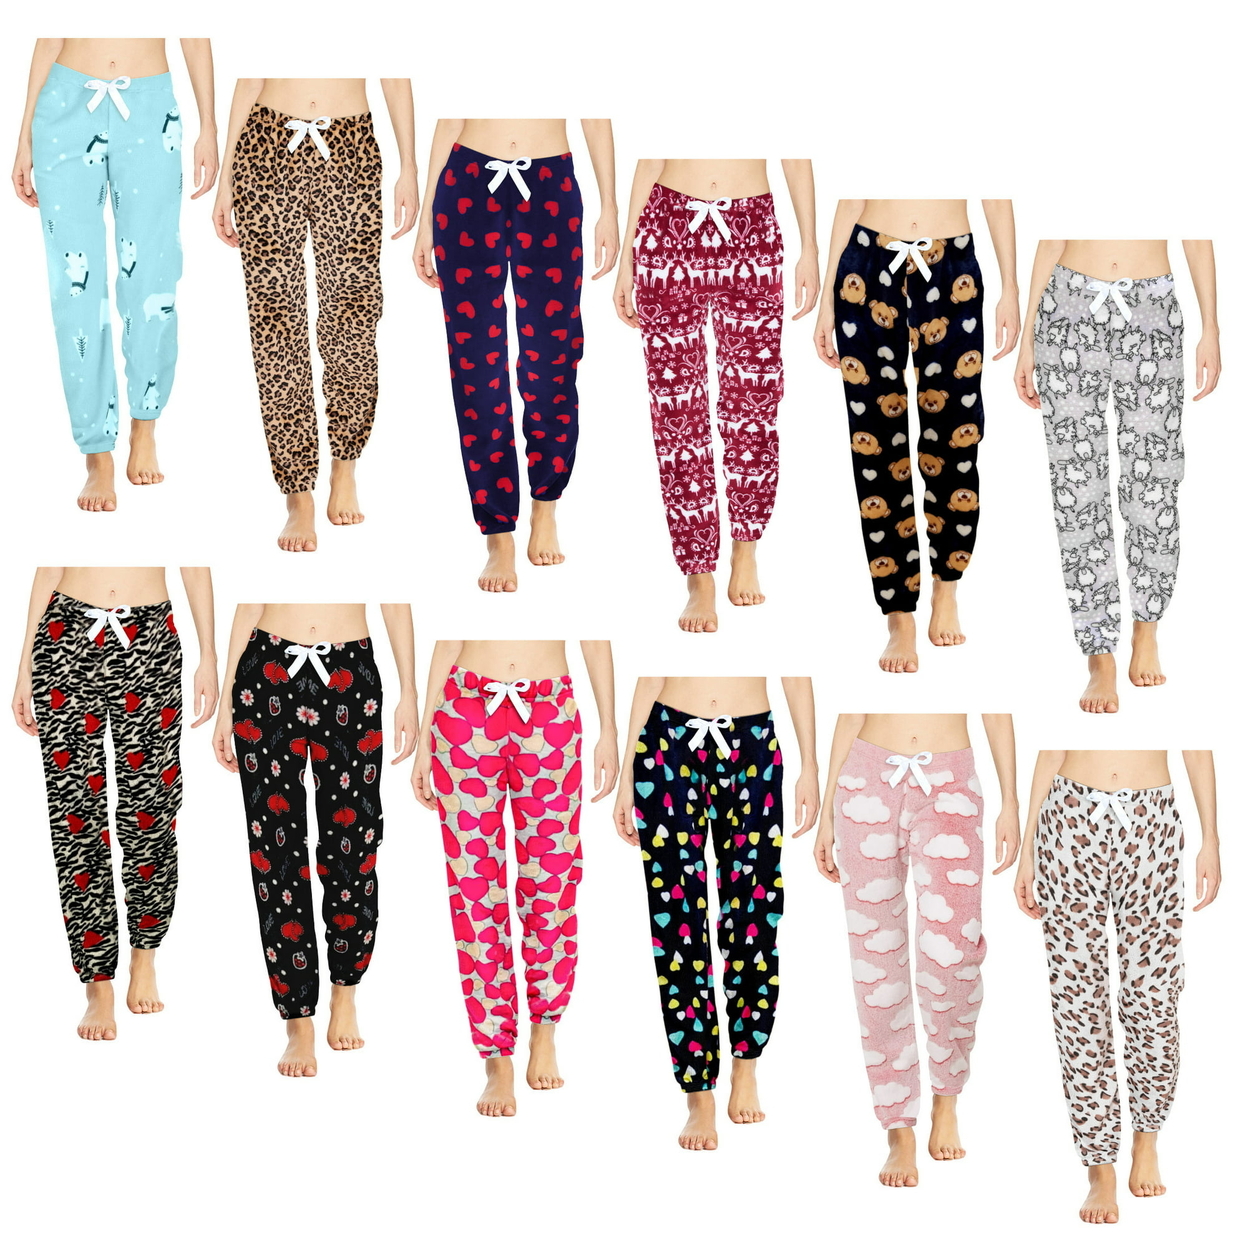 Multi-Pack: Women's Printed Ultra-Soft Comfy Stretch Micro-Fleece Pajama Lounge Pants - 3-pack, Shapes, Small